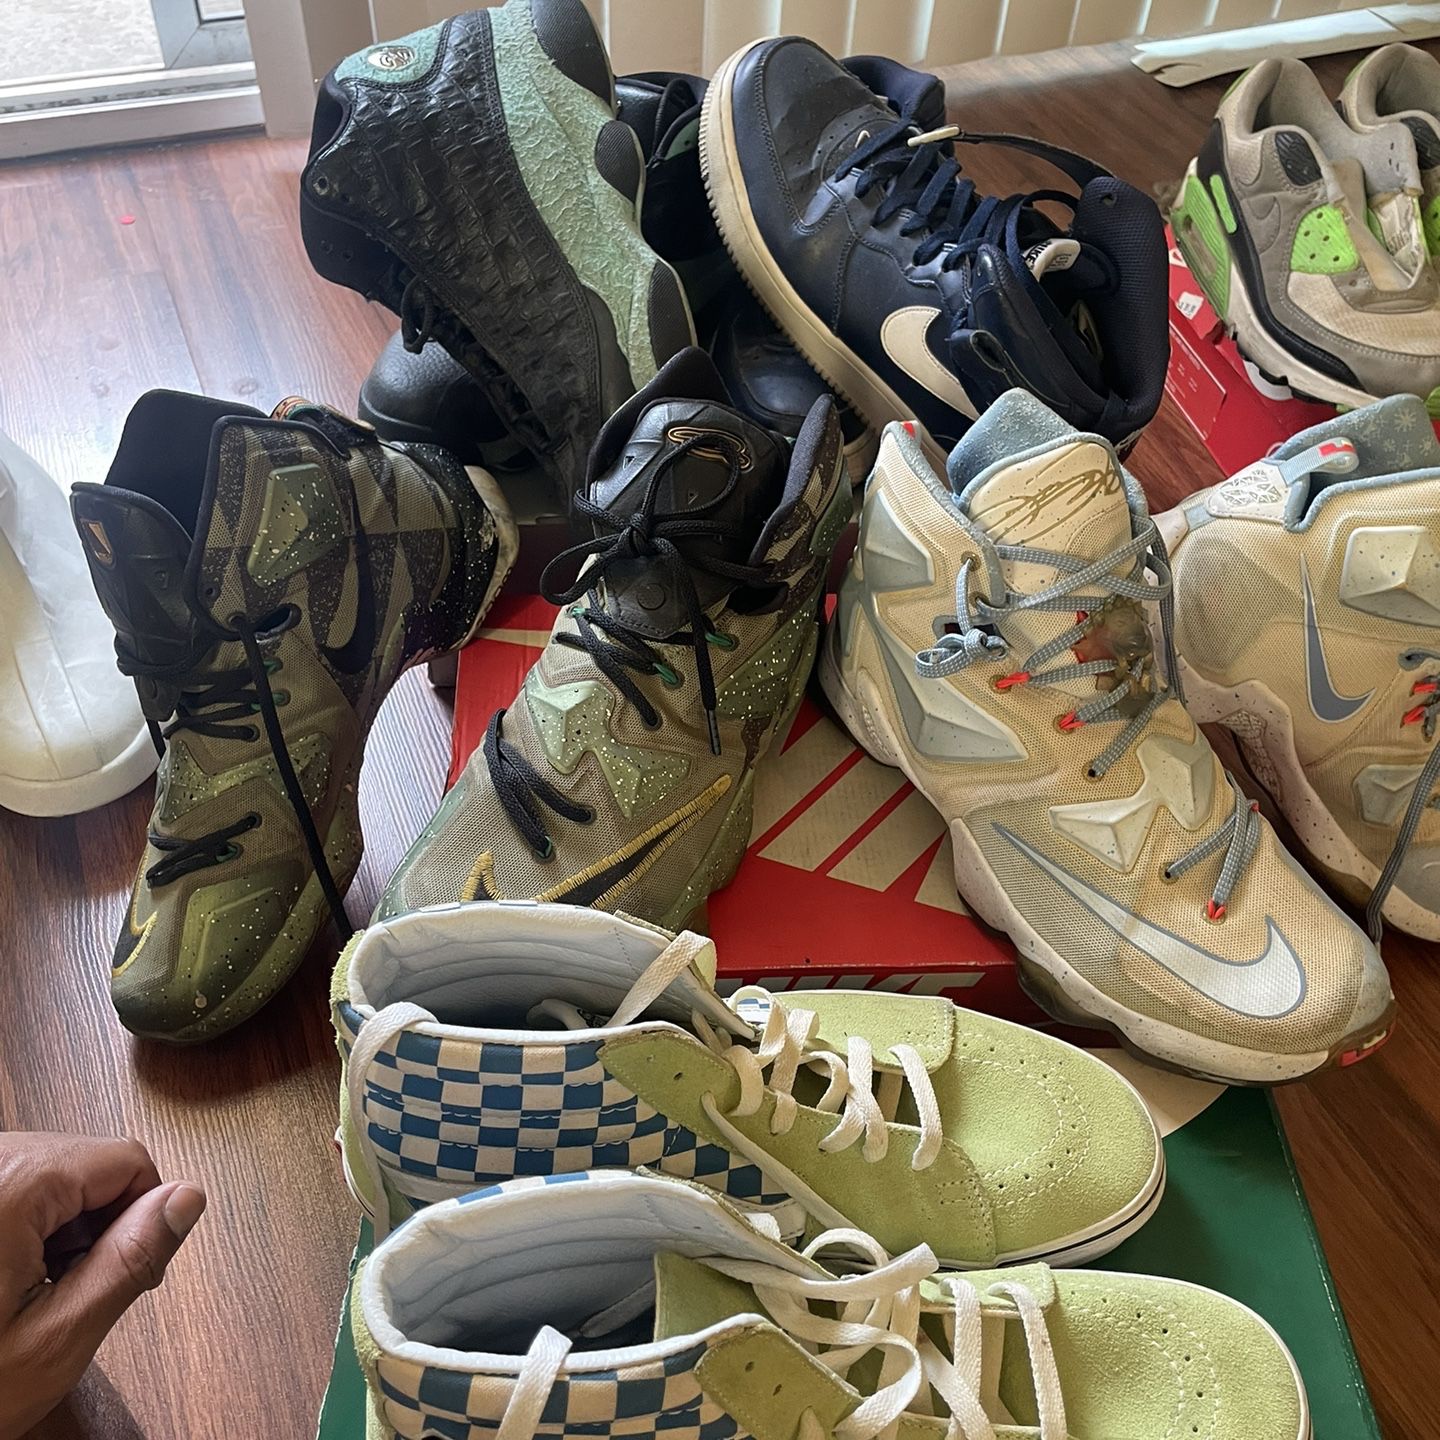 USED 9.5 men Shoes $5- $10